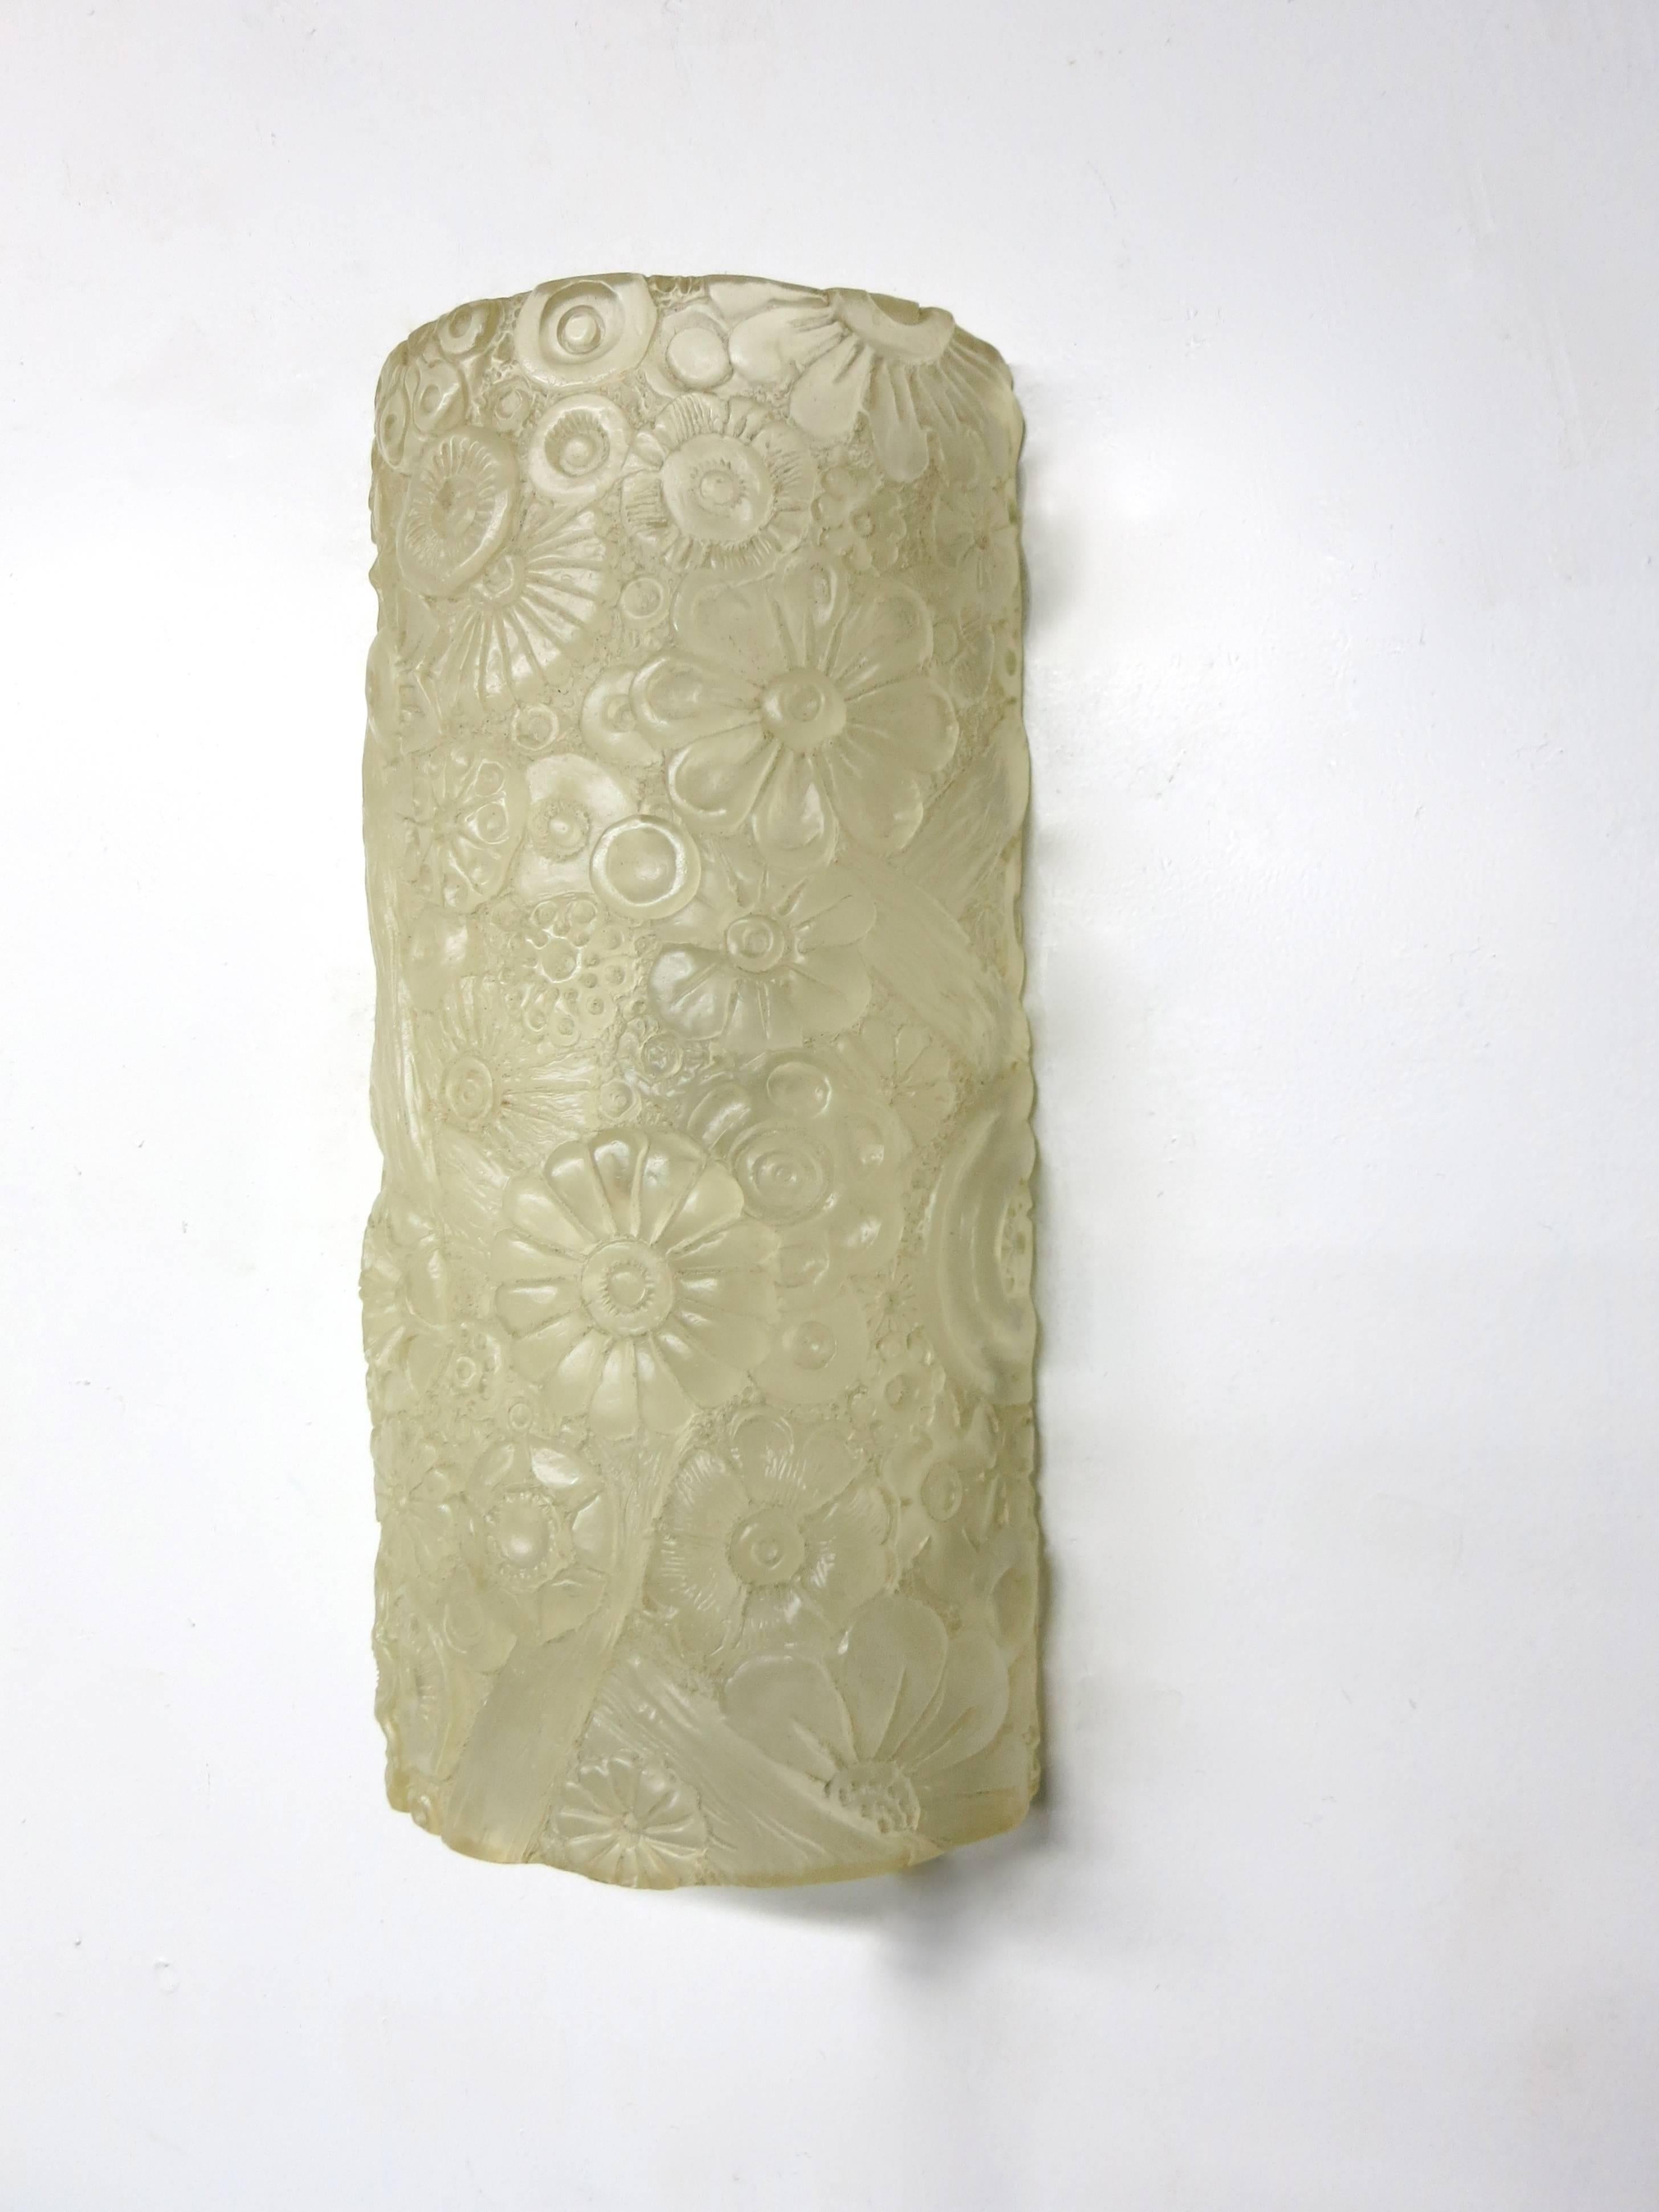 Wall sconce with a half round cast resin shade that flush mounts. The floral detail shade hides two standard American sockets and a mounting plate.